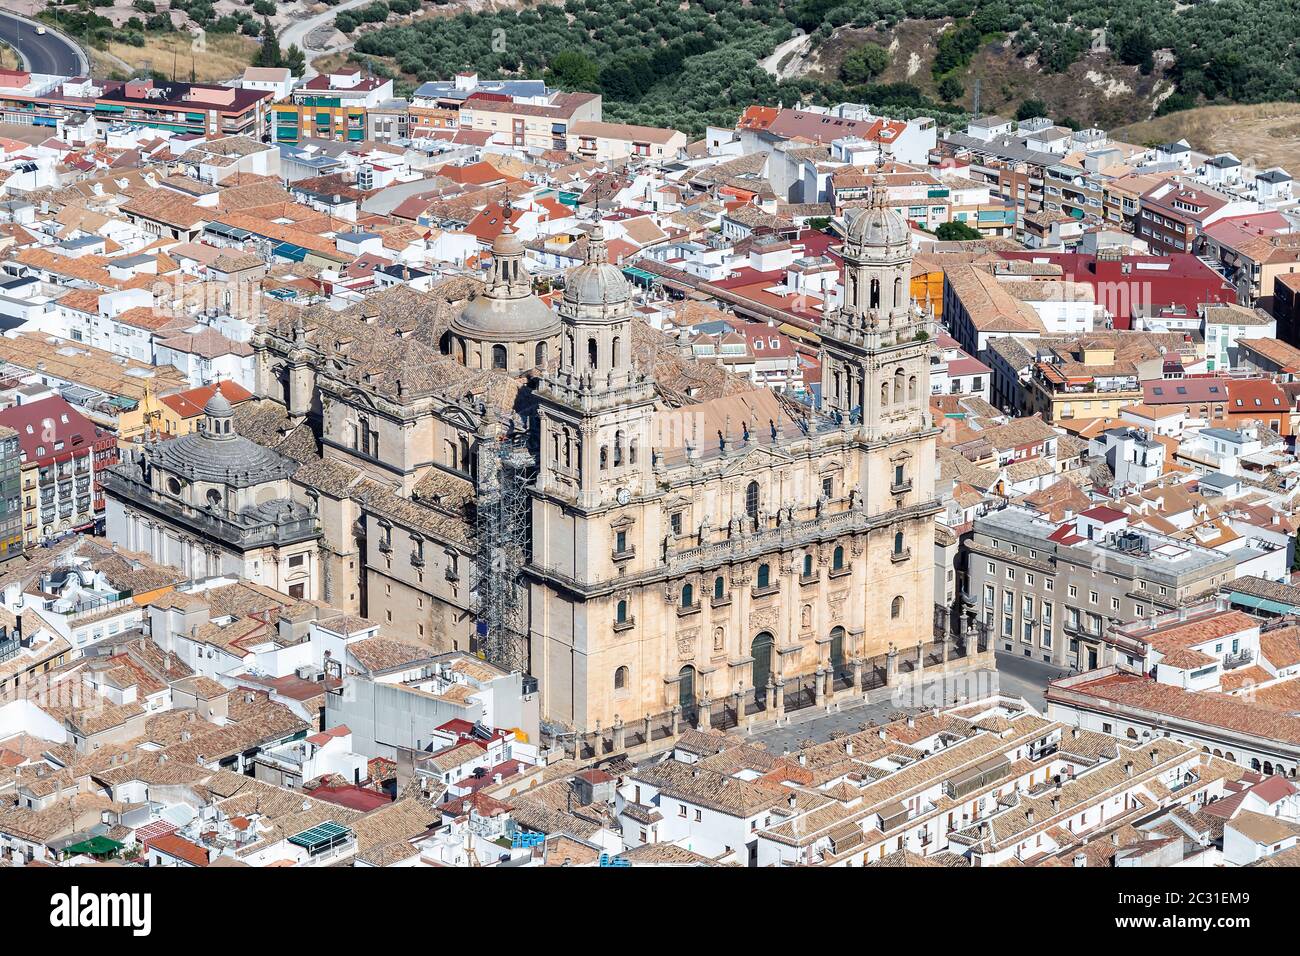 Aerial view of Jaen Cathedral under reconstruction Stock Photo